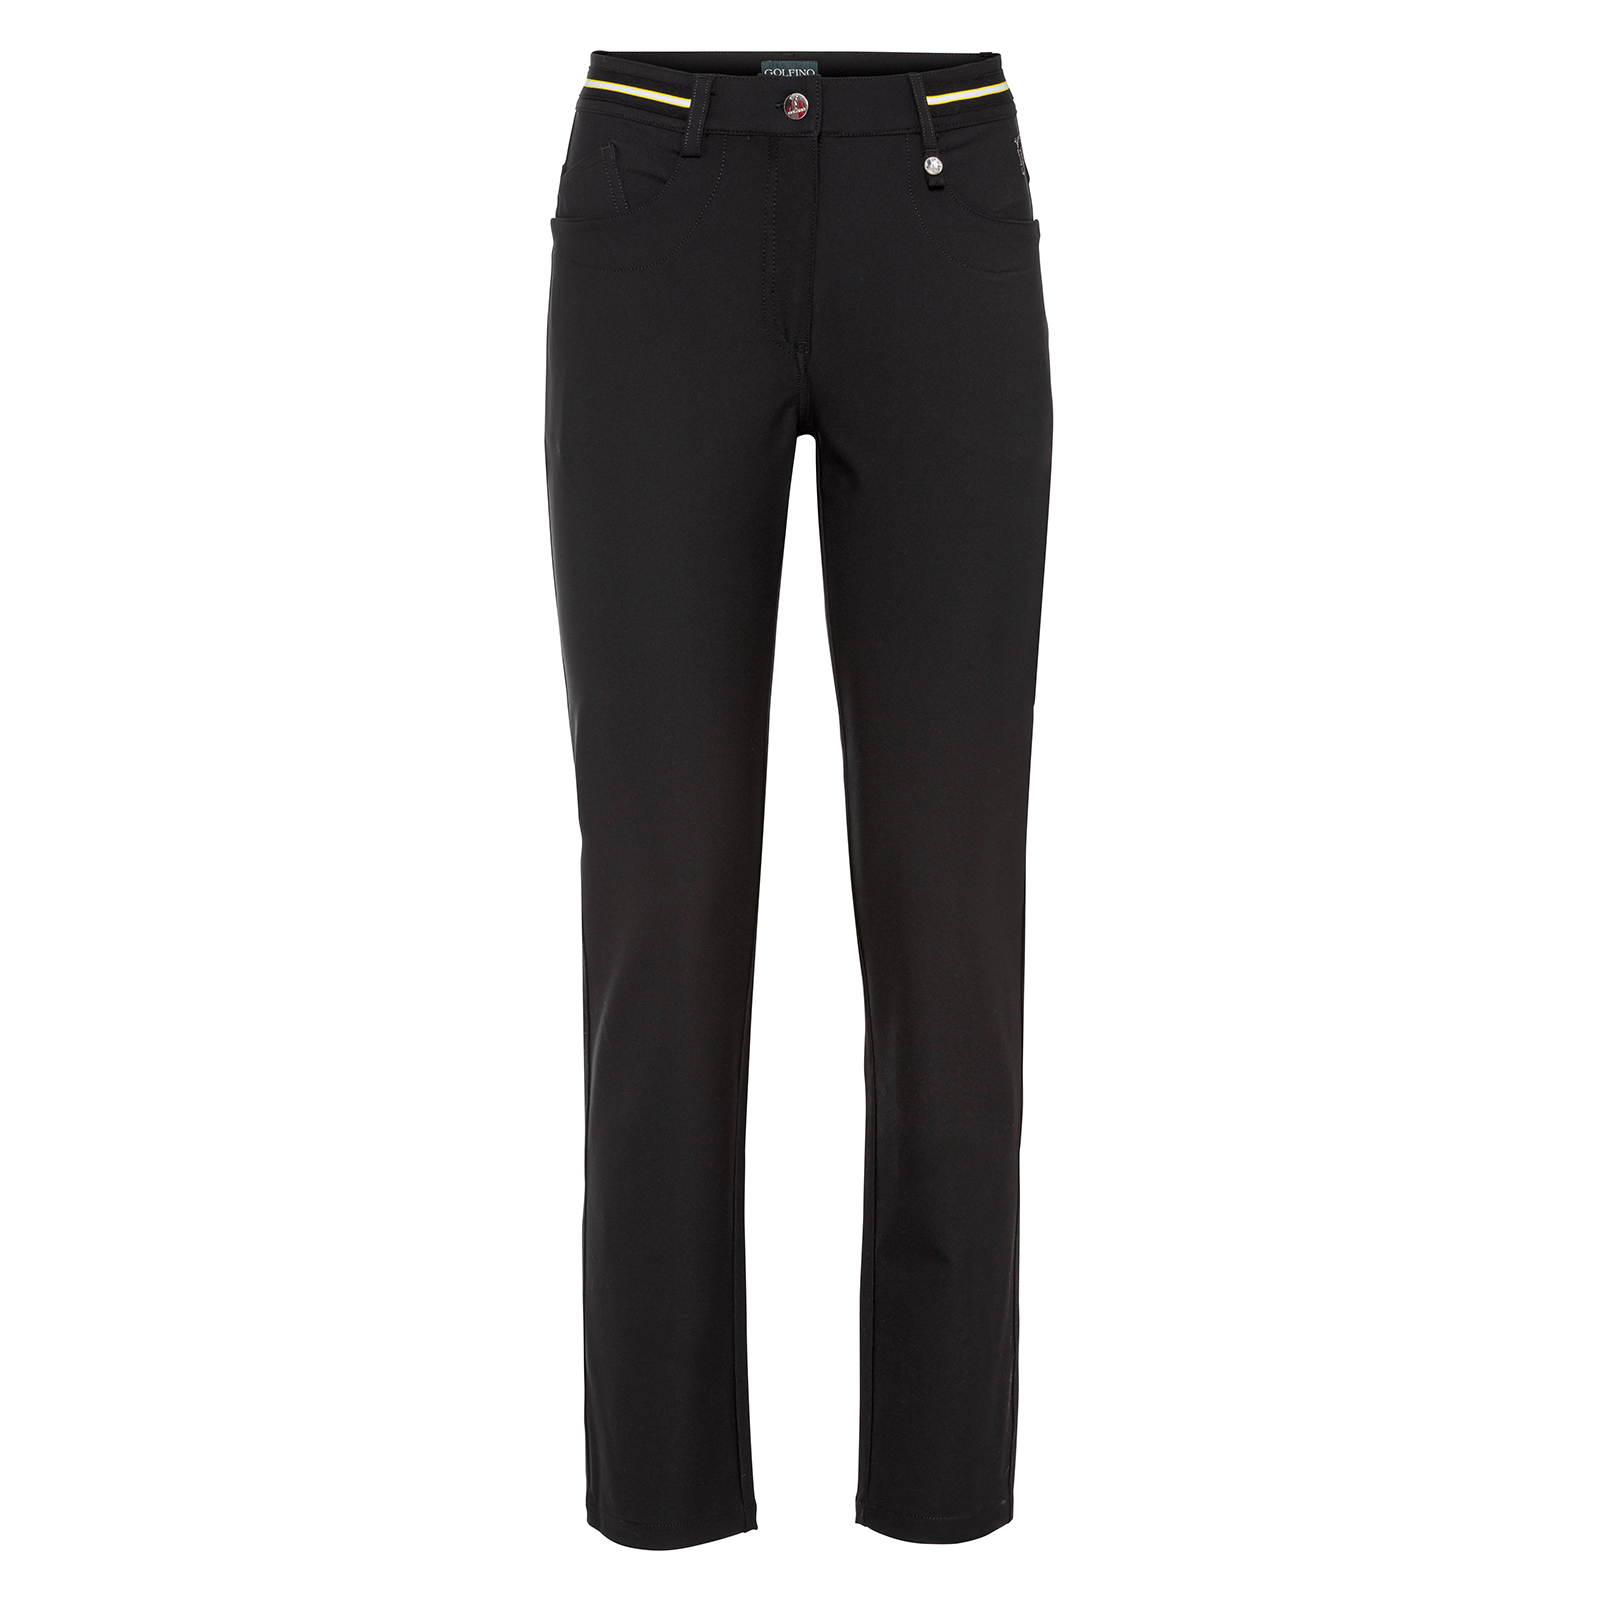 Ladies' Slim Fit trousers made from water-repellent material 